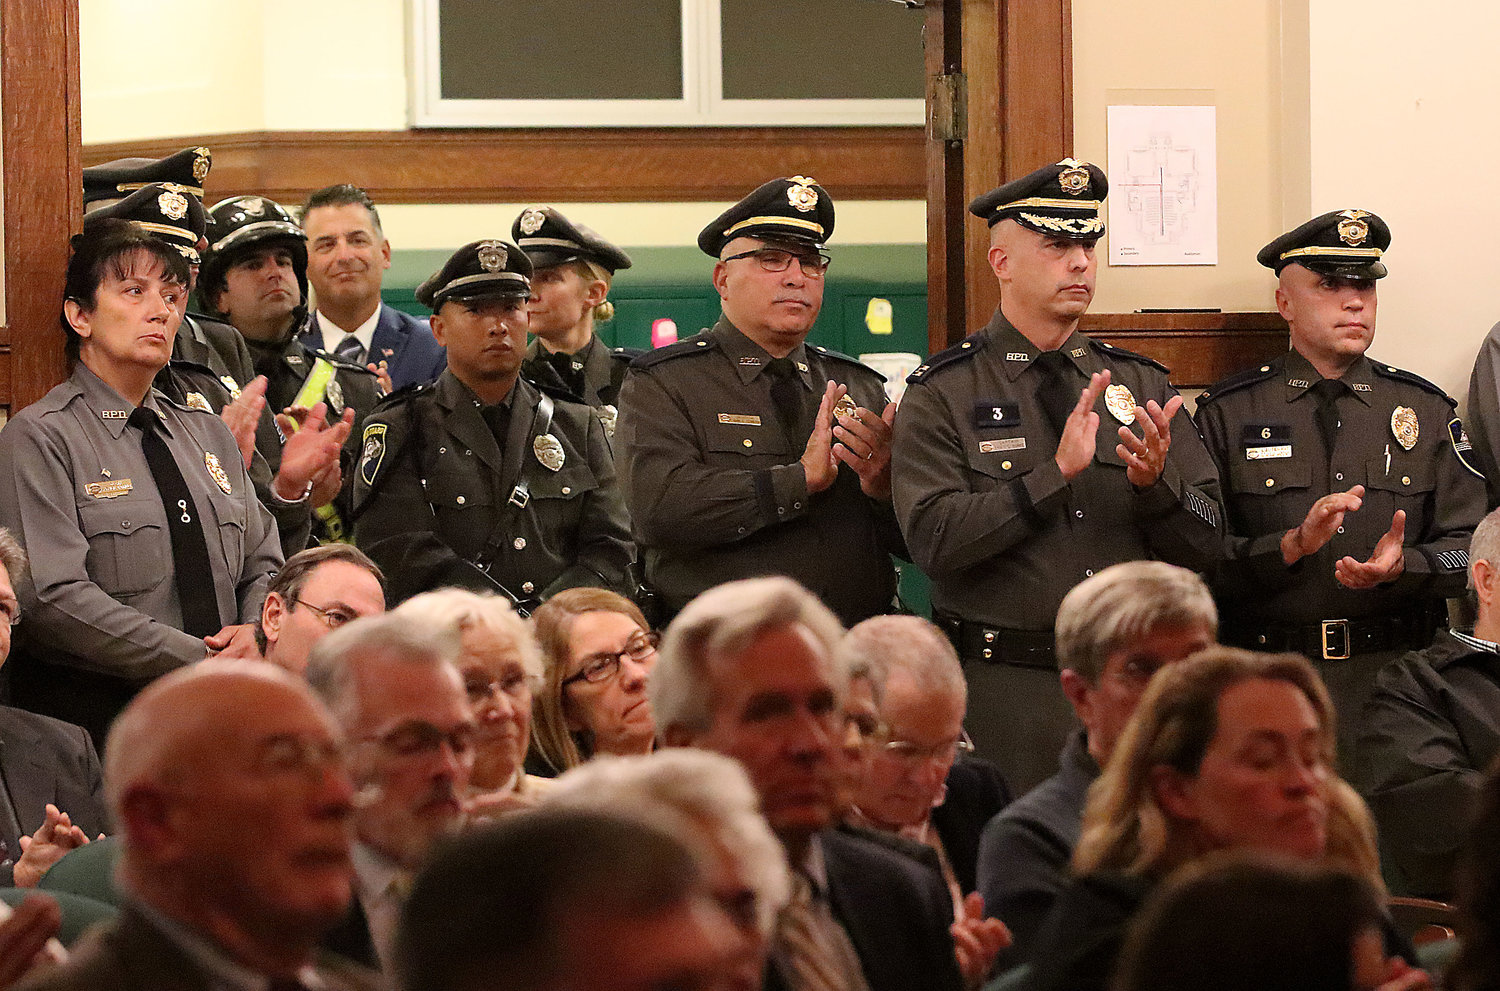 Bristol police officers applaud at the swearing-in ceremony for Chief Kevin Lynch, back in 2019.